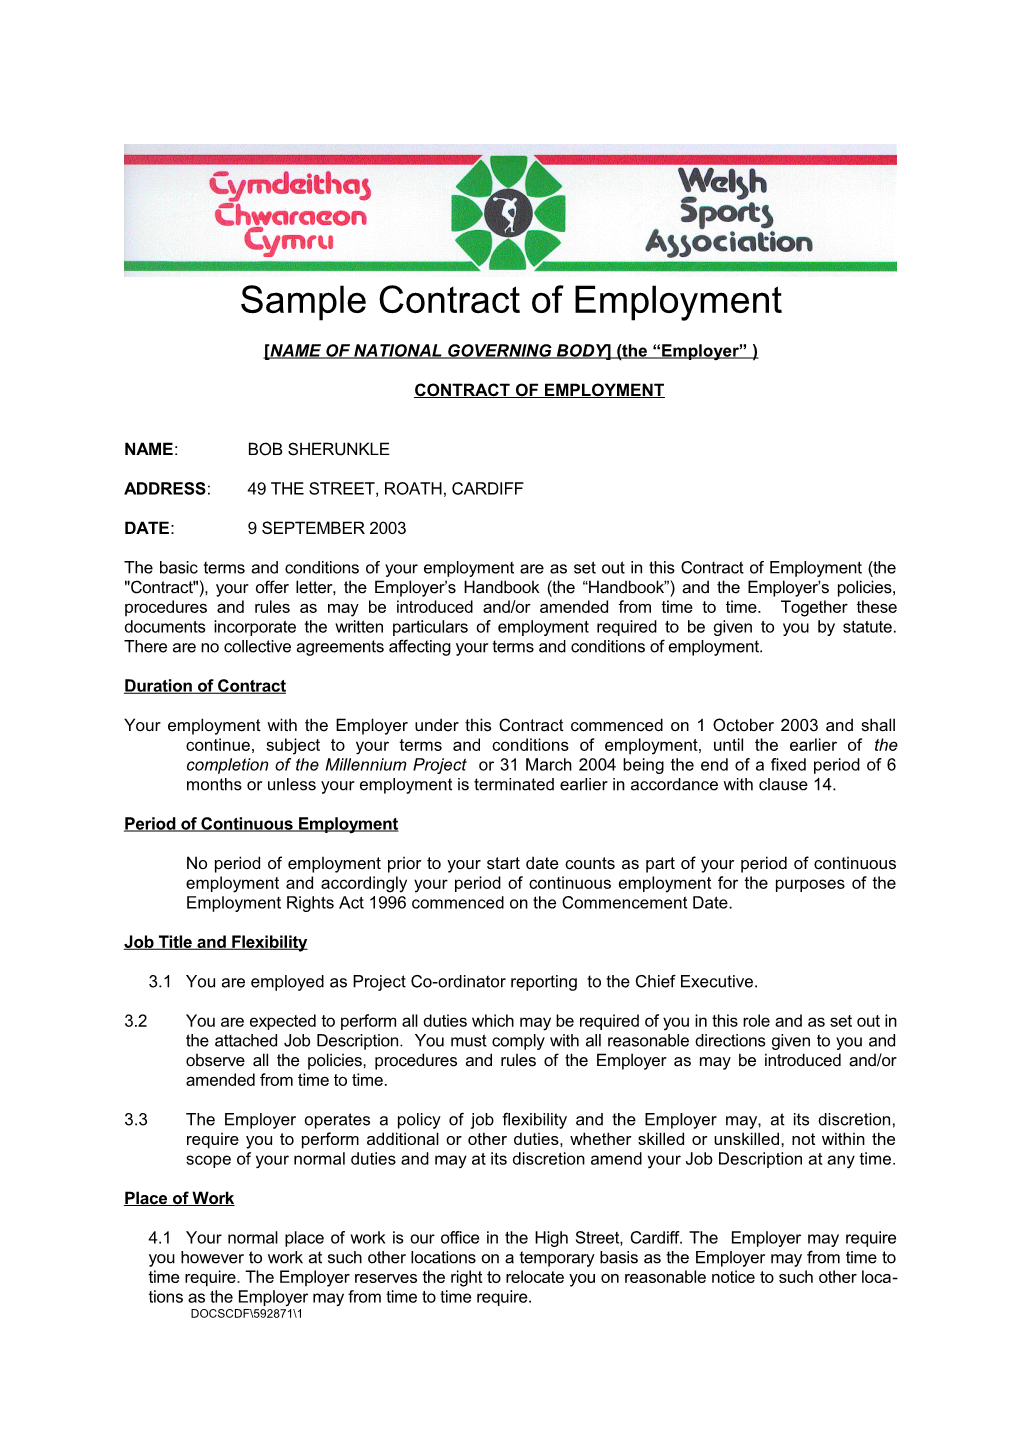 Template Contract of Employment